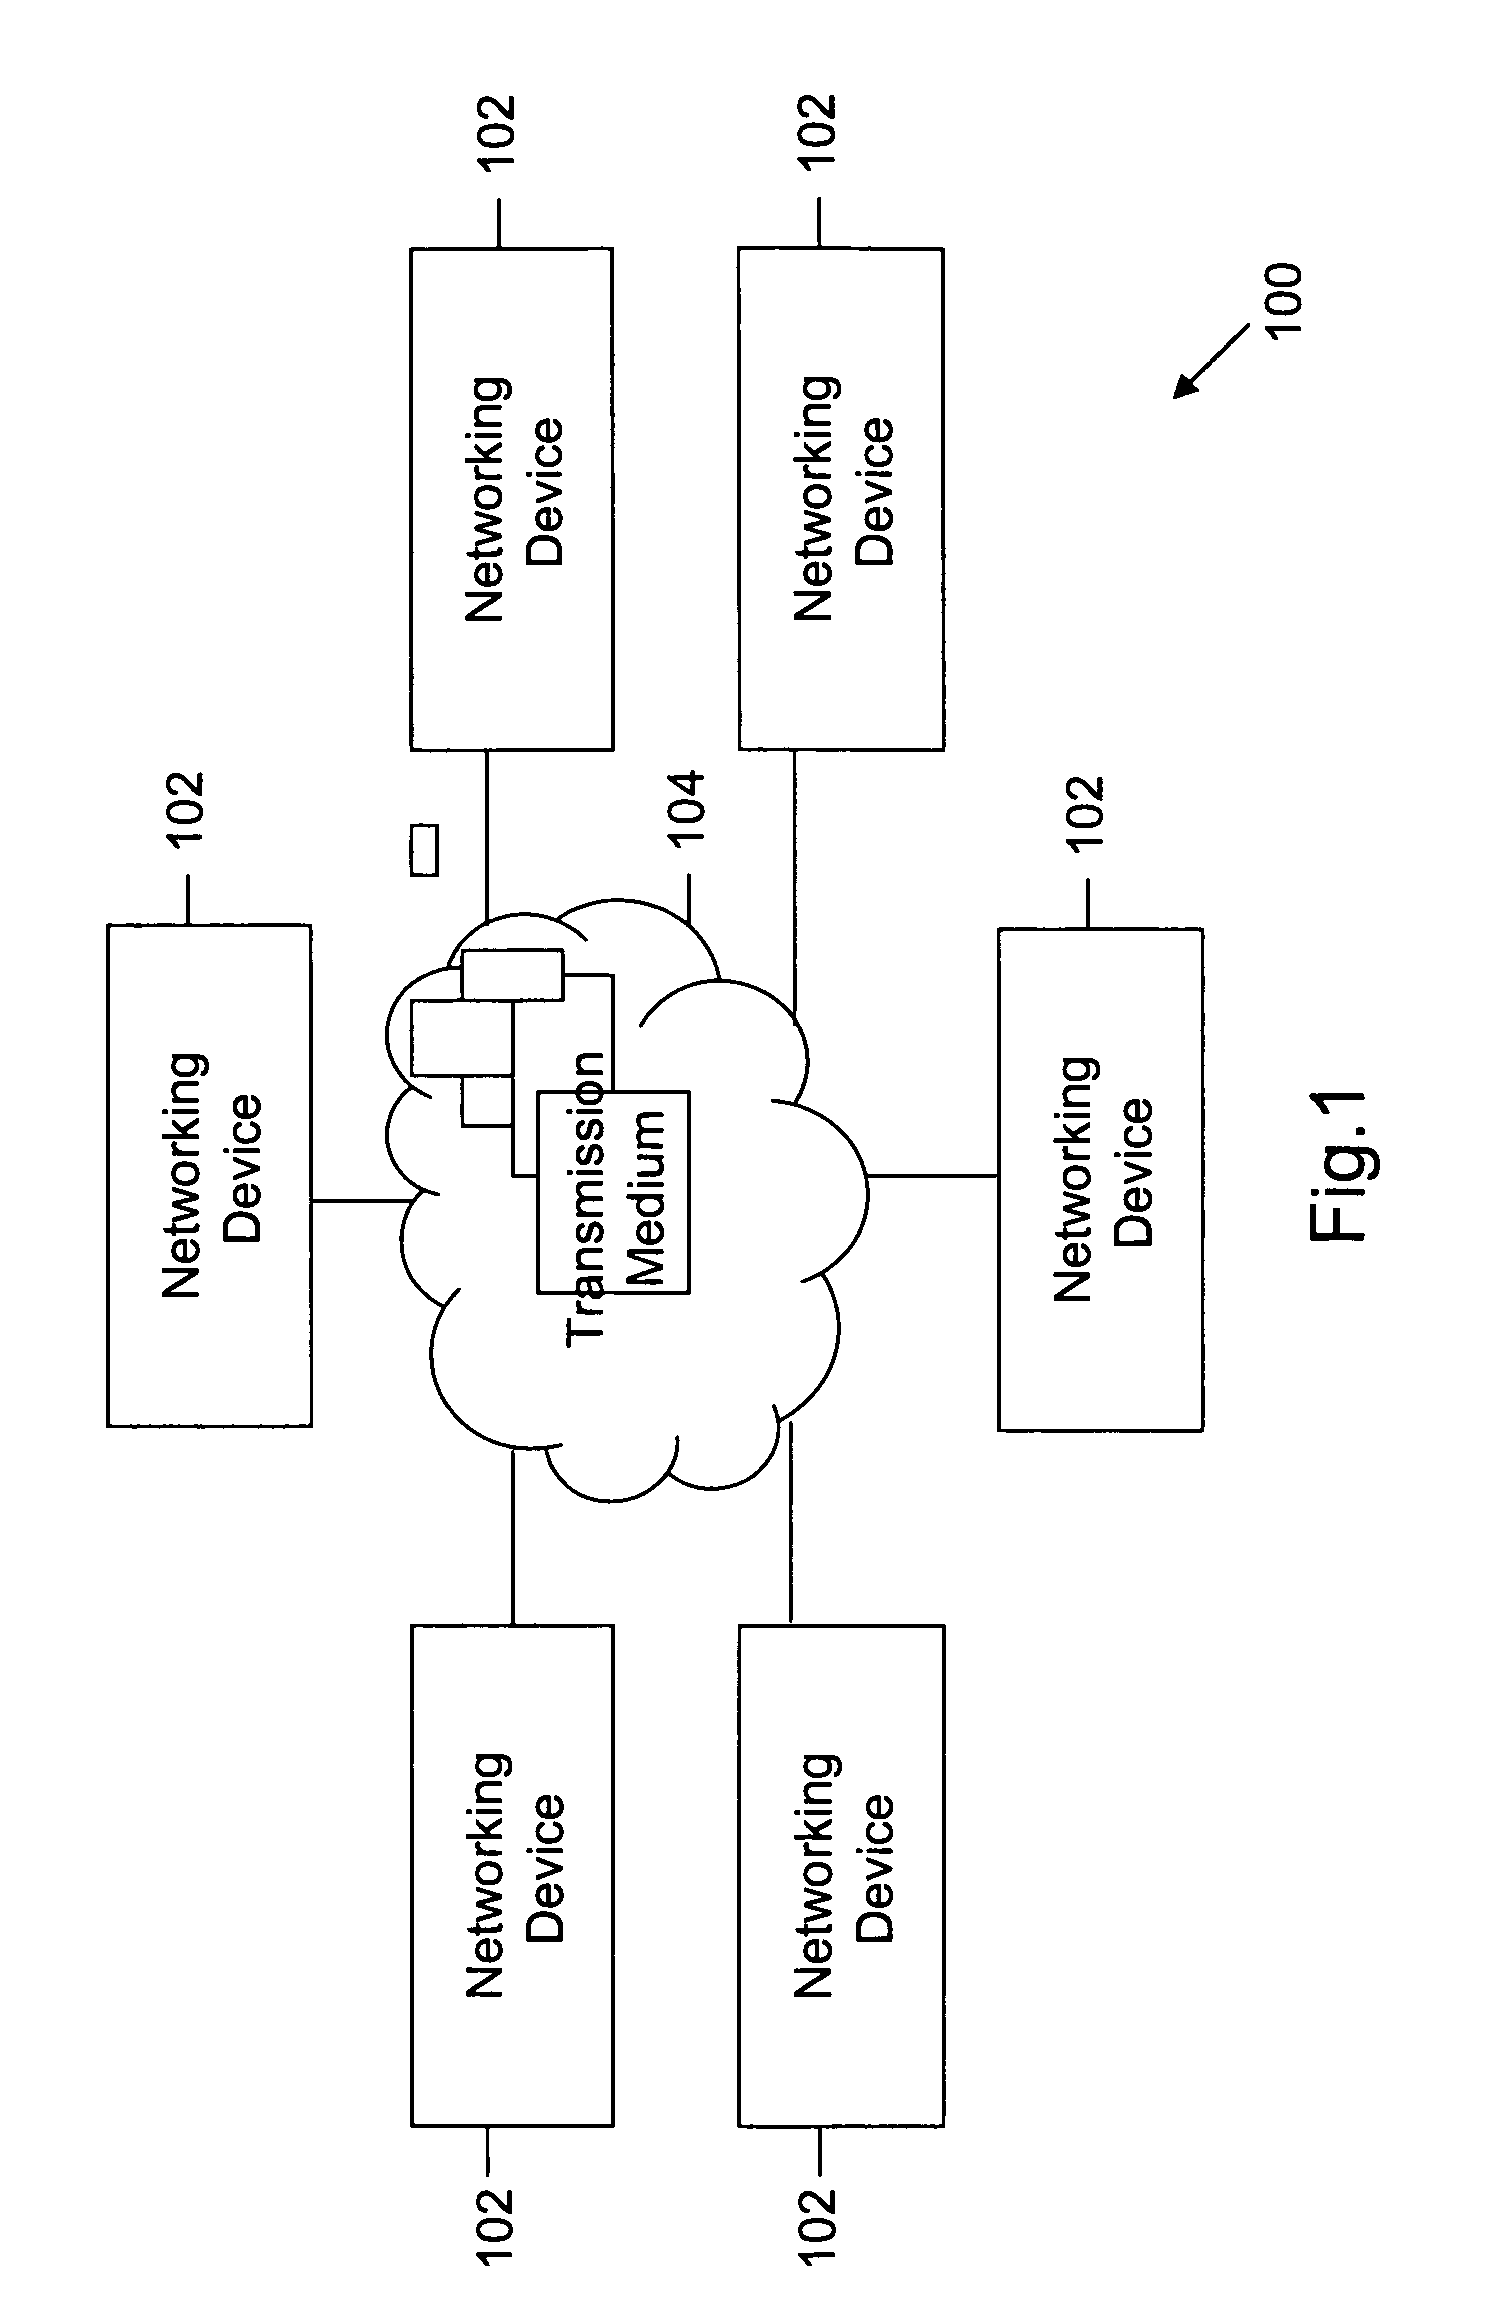 Method and system for mirroring dropped packets